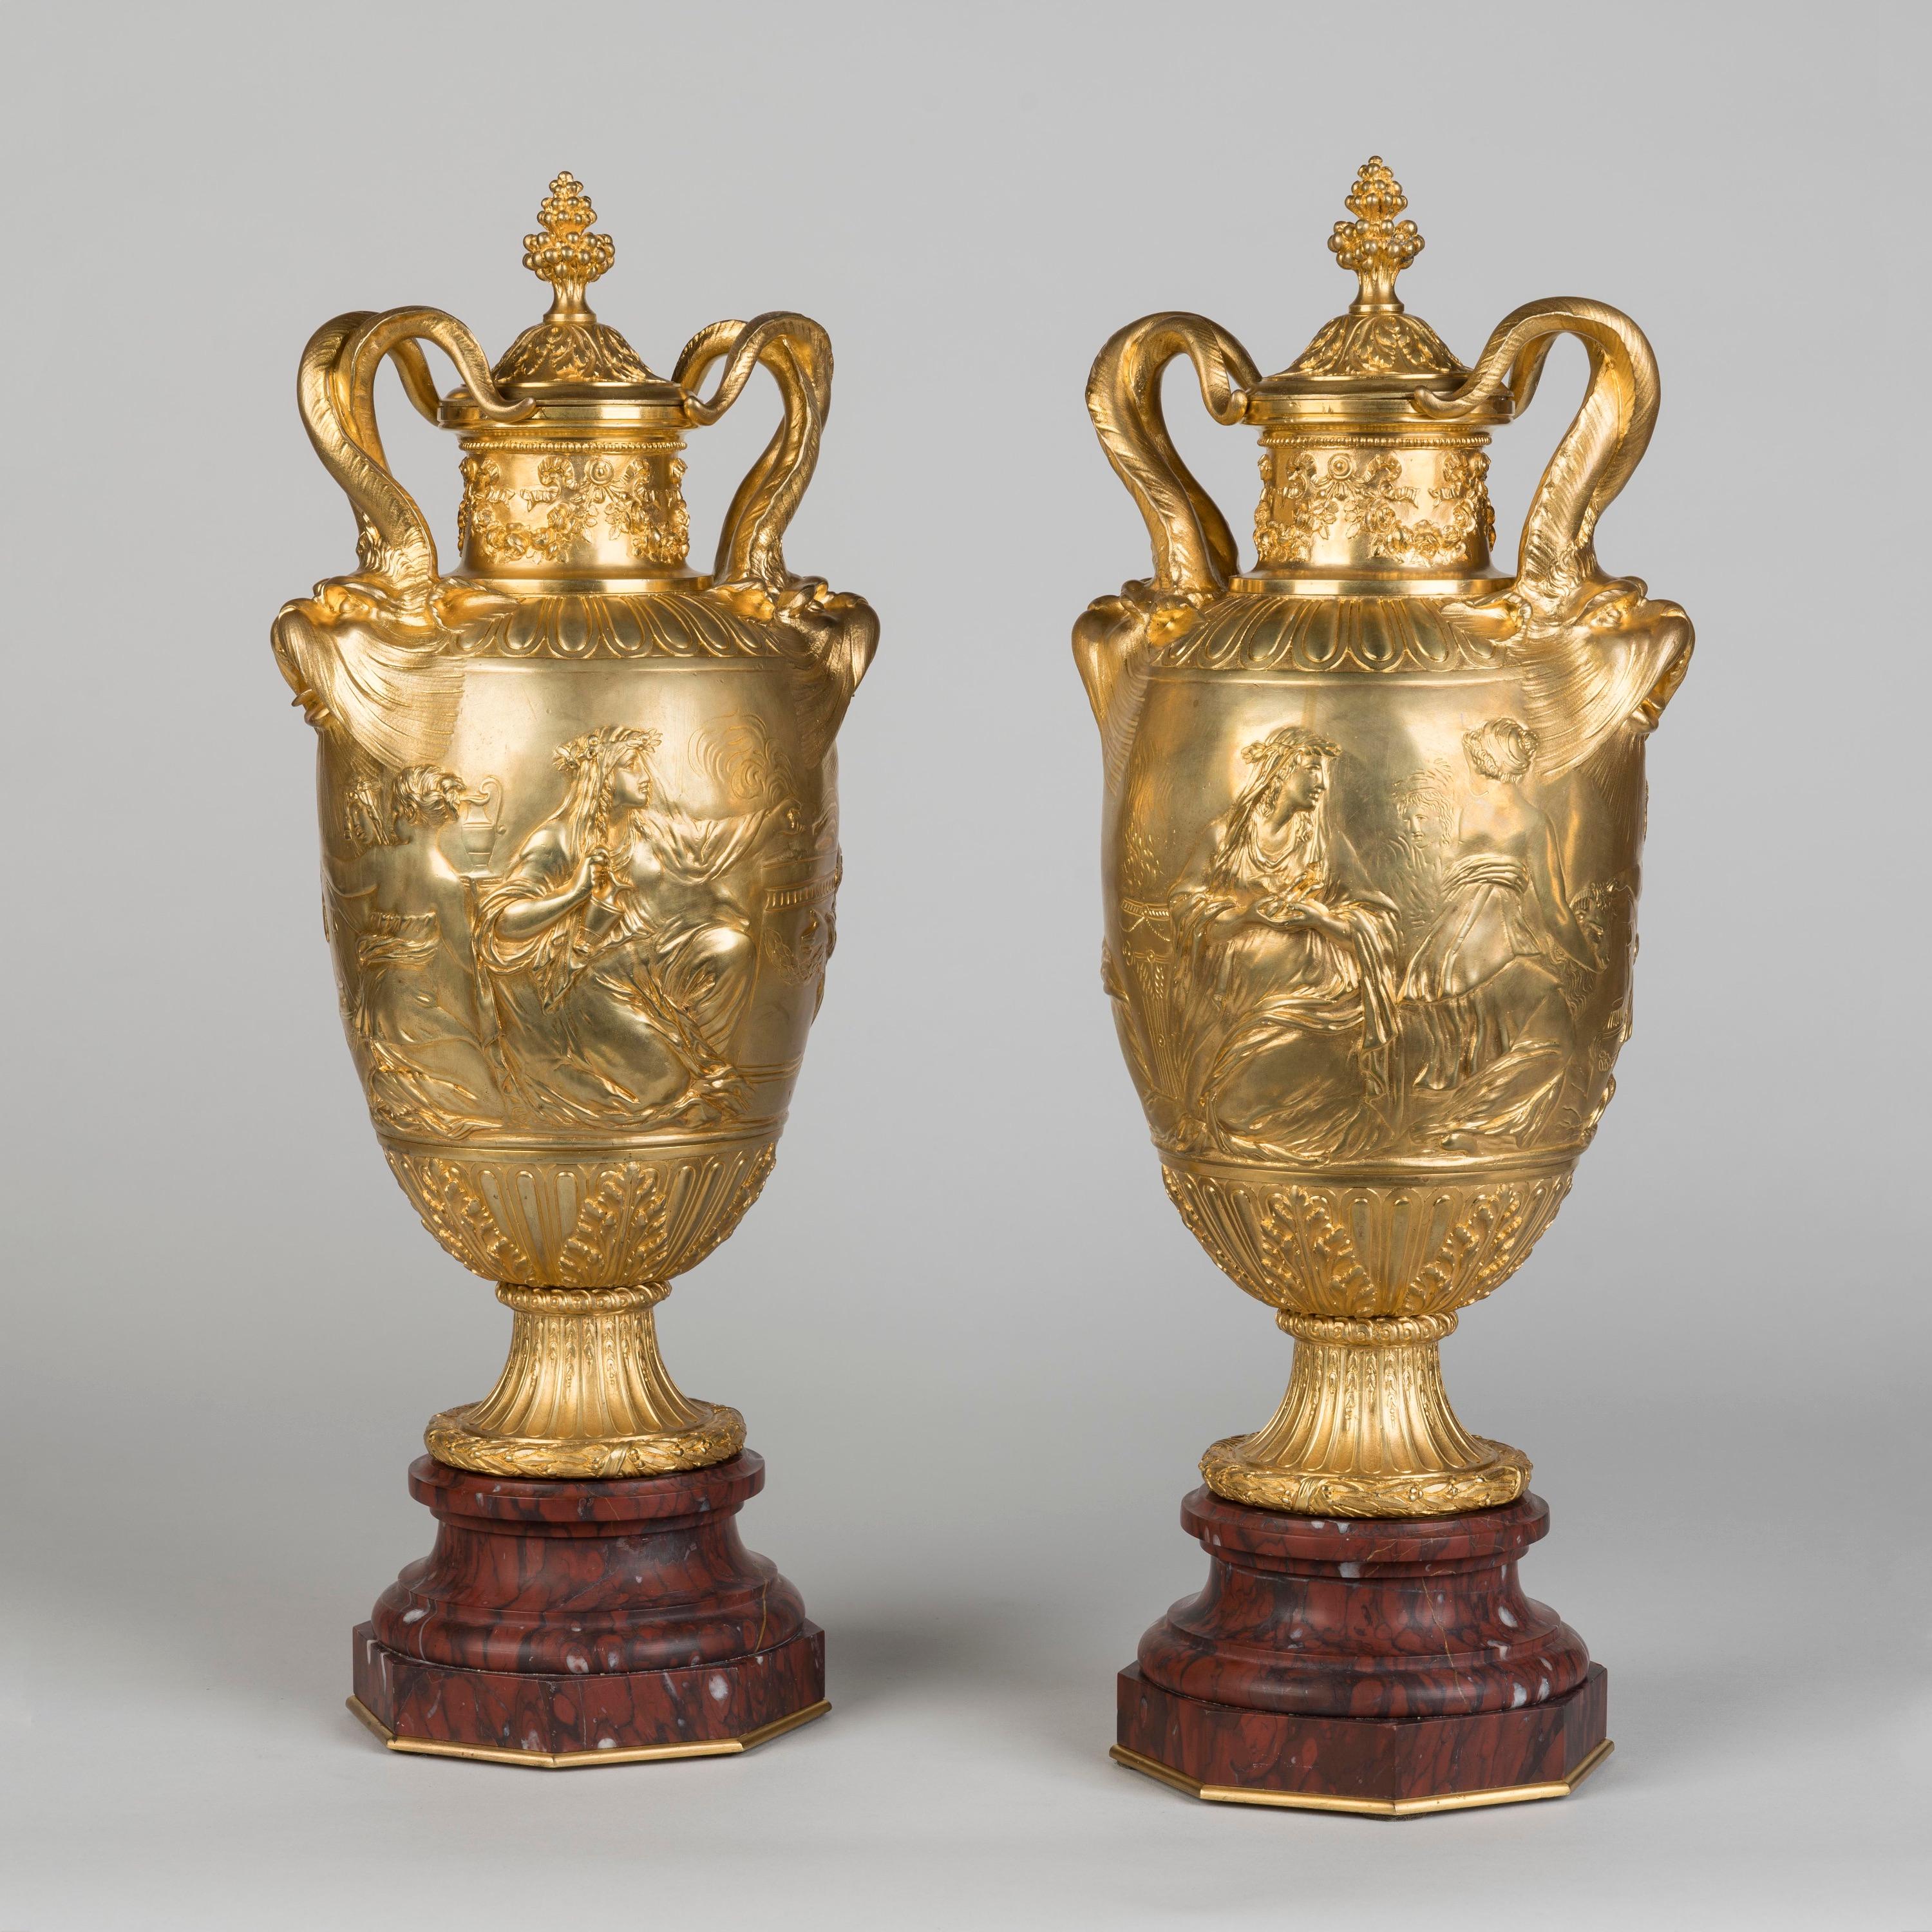 French 19th Century Pair of Gilt Bronze Vases Designed by Clodion Made by Barbedienne For Sale